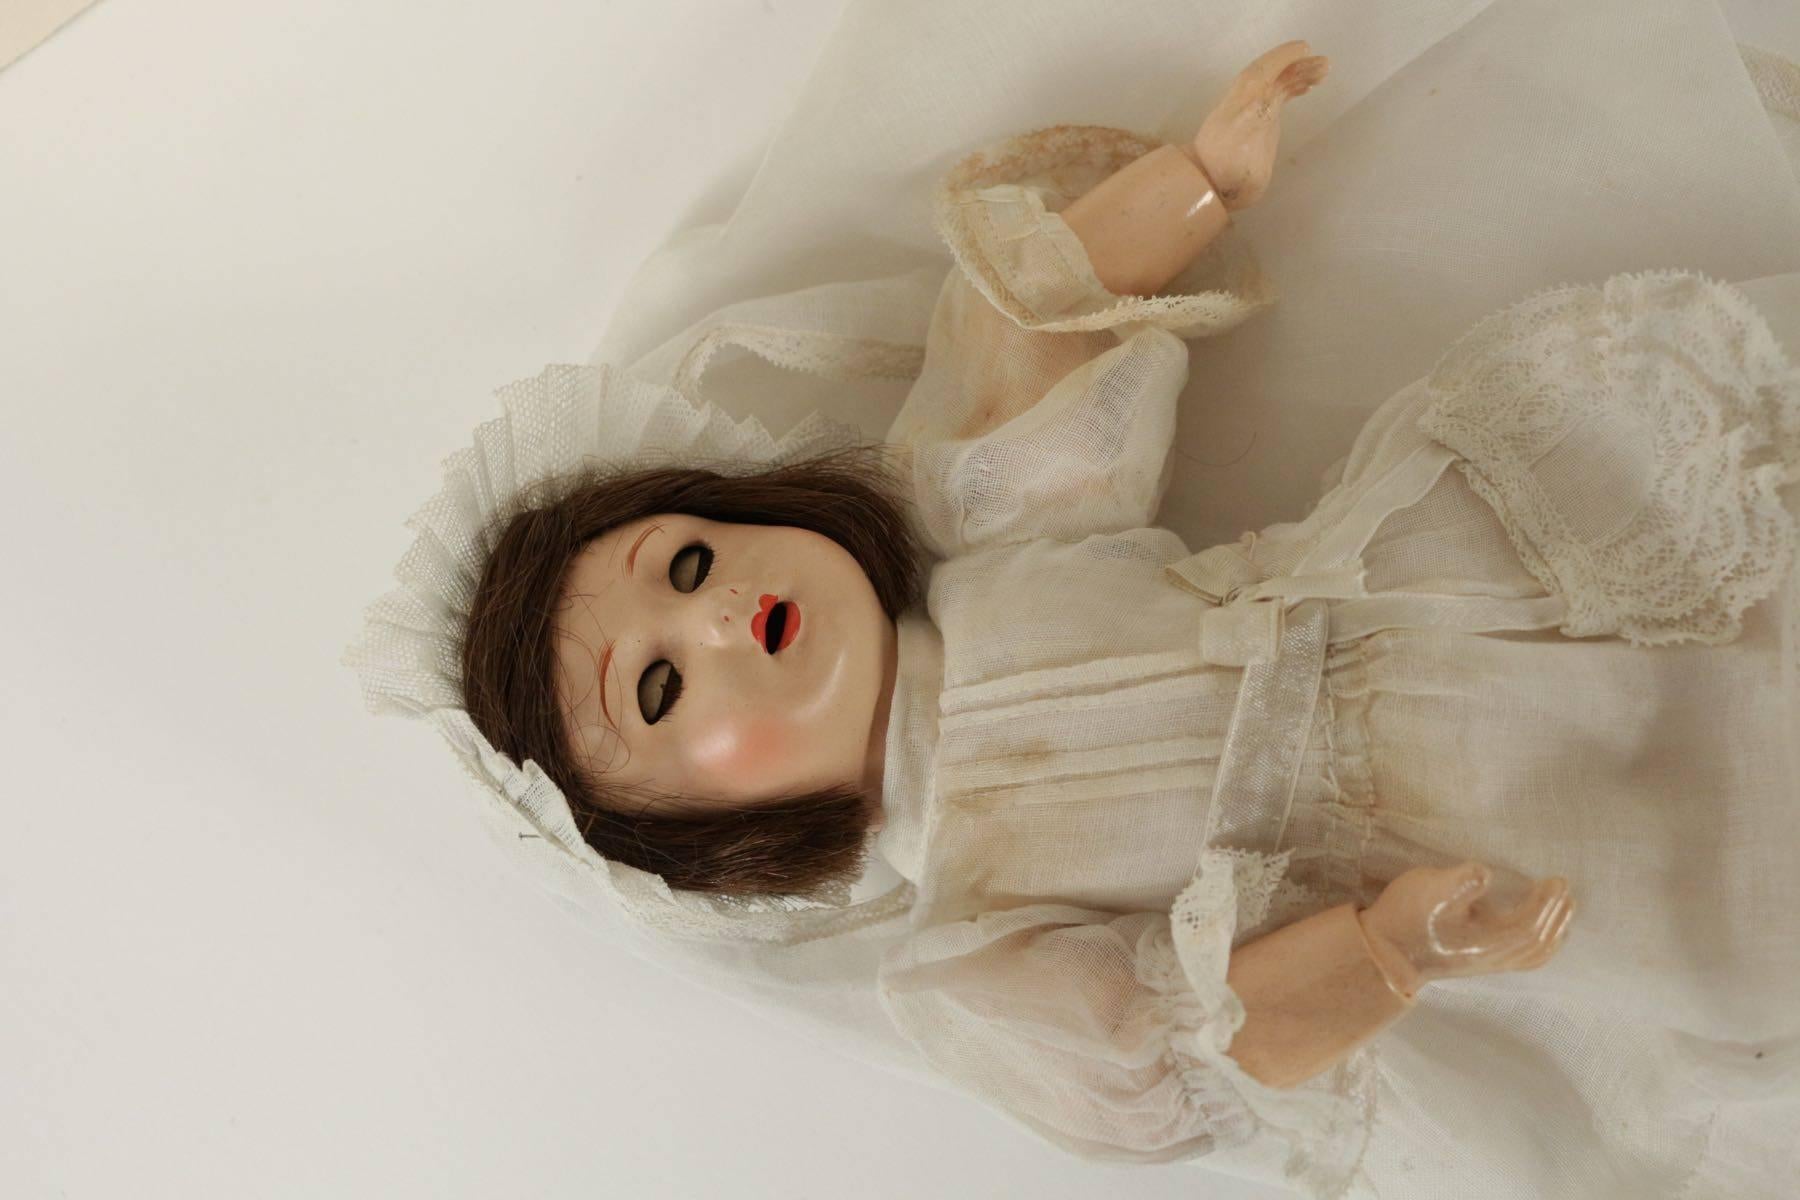 Doll from the Beginning of the 20th Century Dressed for Sunday 1